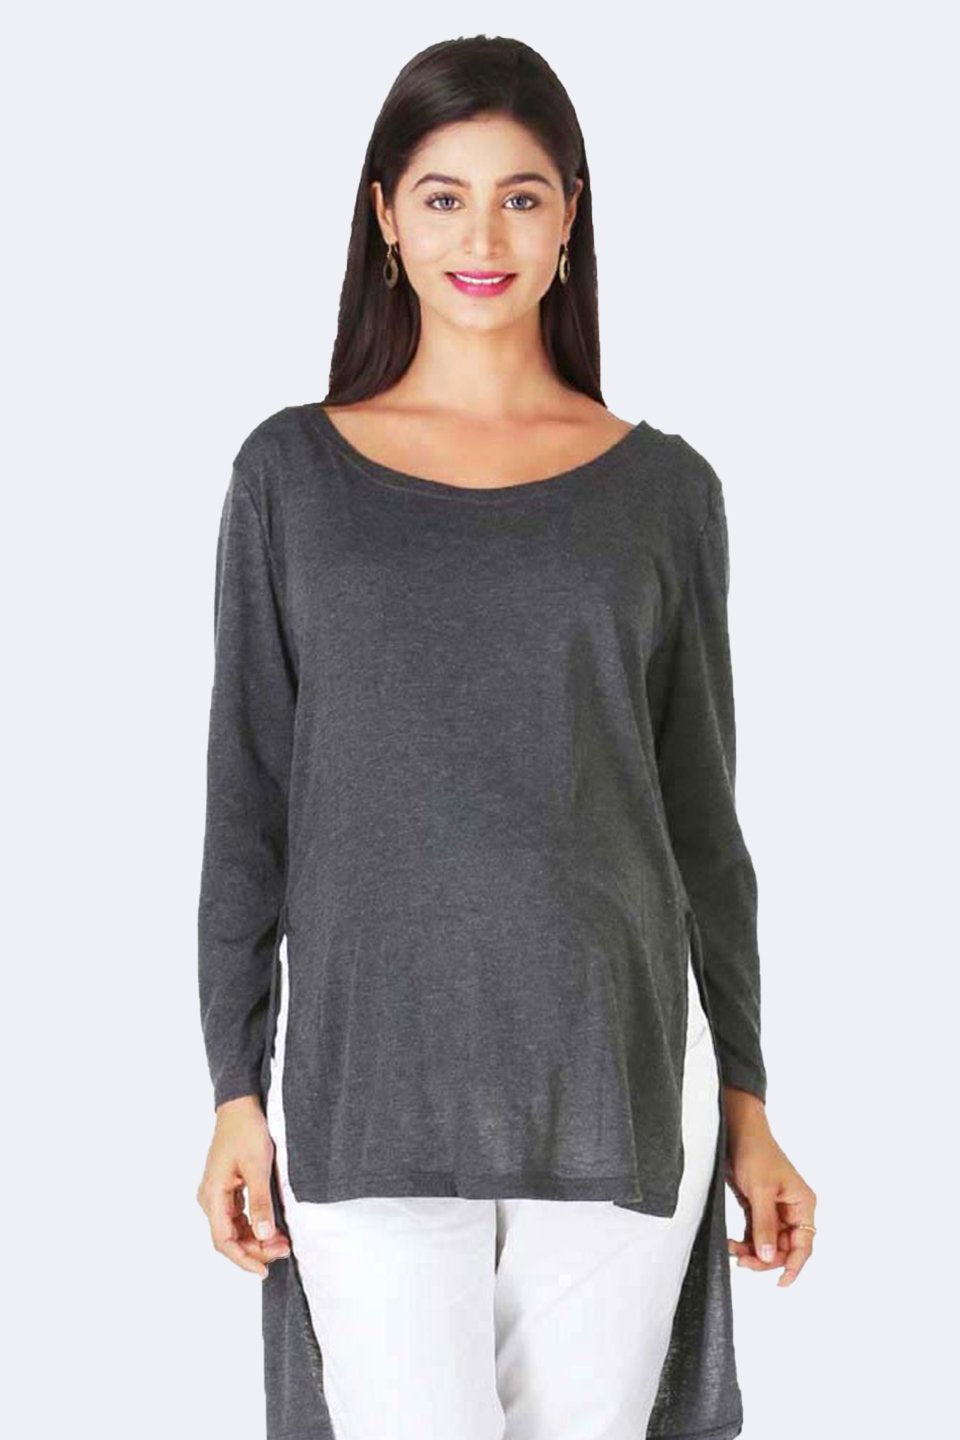 Charcoal Grey Maternity Top